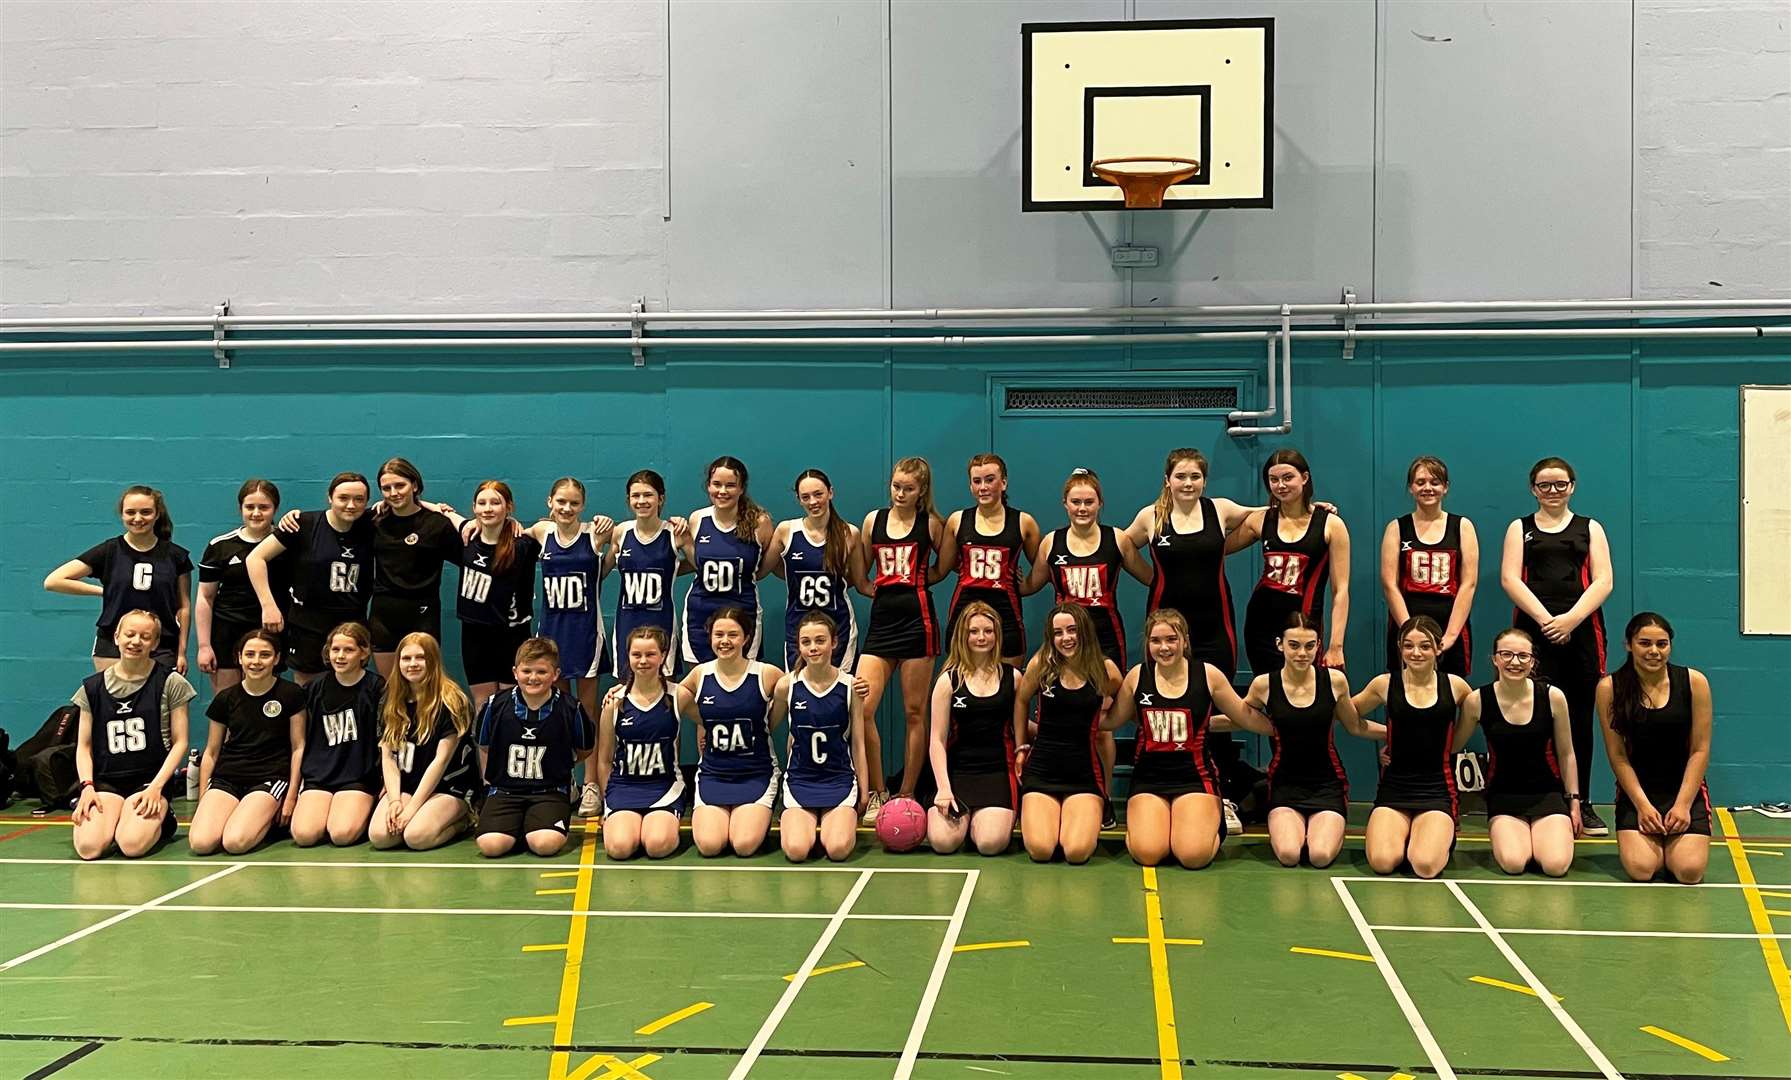 Girls who competed for the Thurso and Wick high school teams in their first competitive netball matches since the pandemic began.